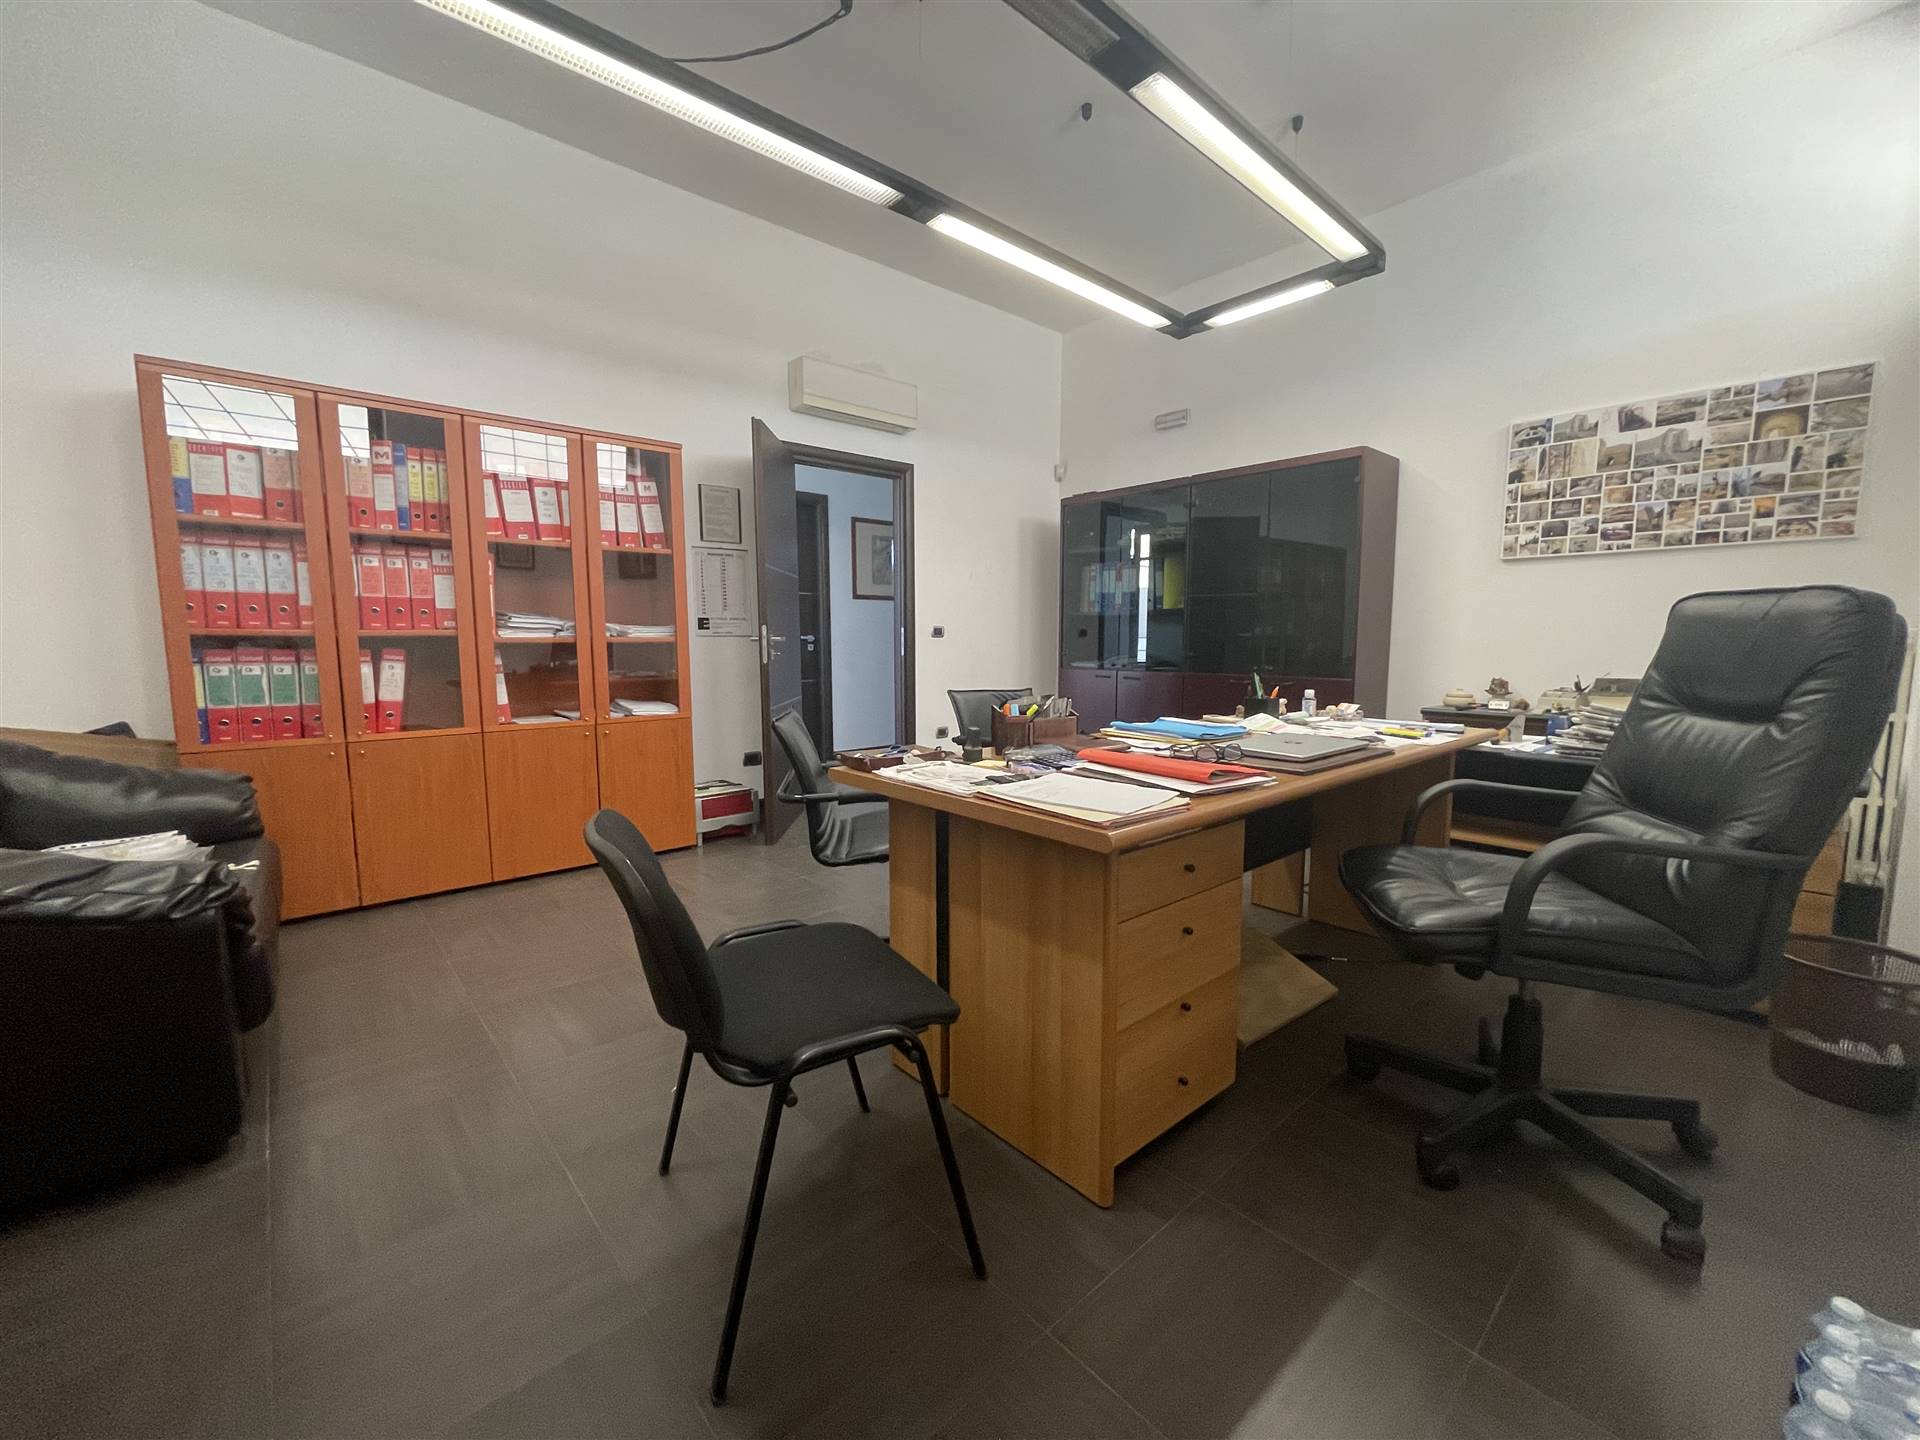 RUDIAE, LECCE, Commercialproperty for sale of 95 Sq. mt., Restored, Heating Individual heating system, Energetic class: F, Epi: 175,8 kwh/m3 year, 